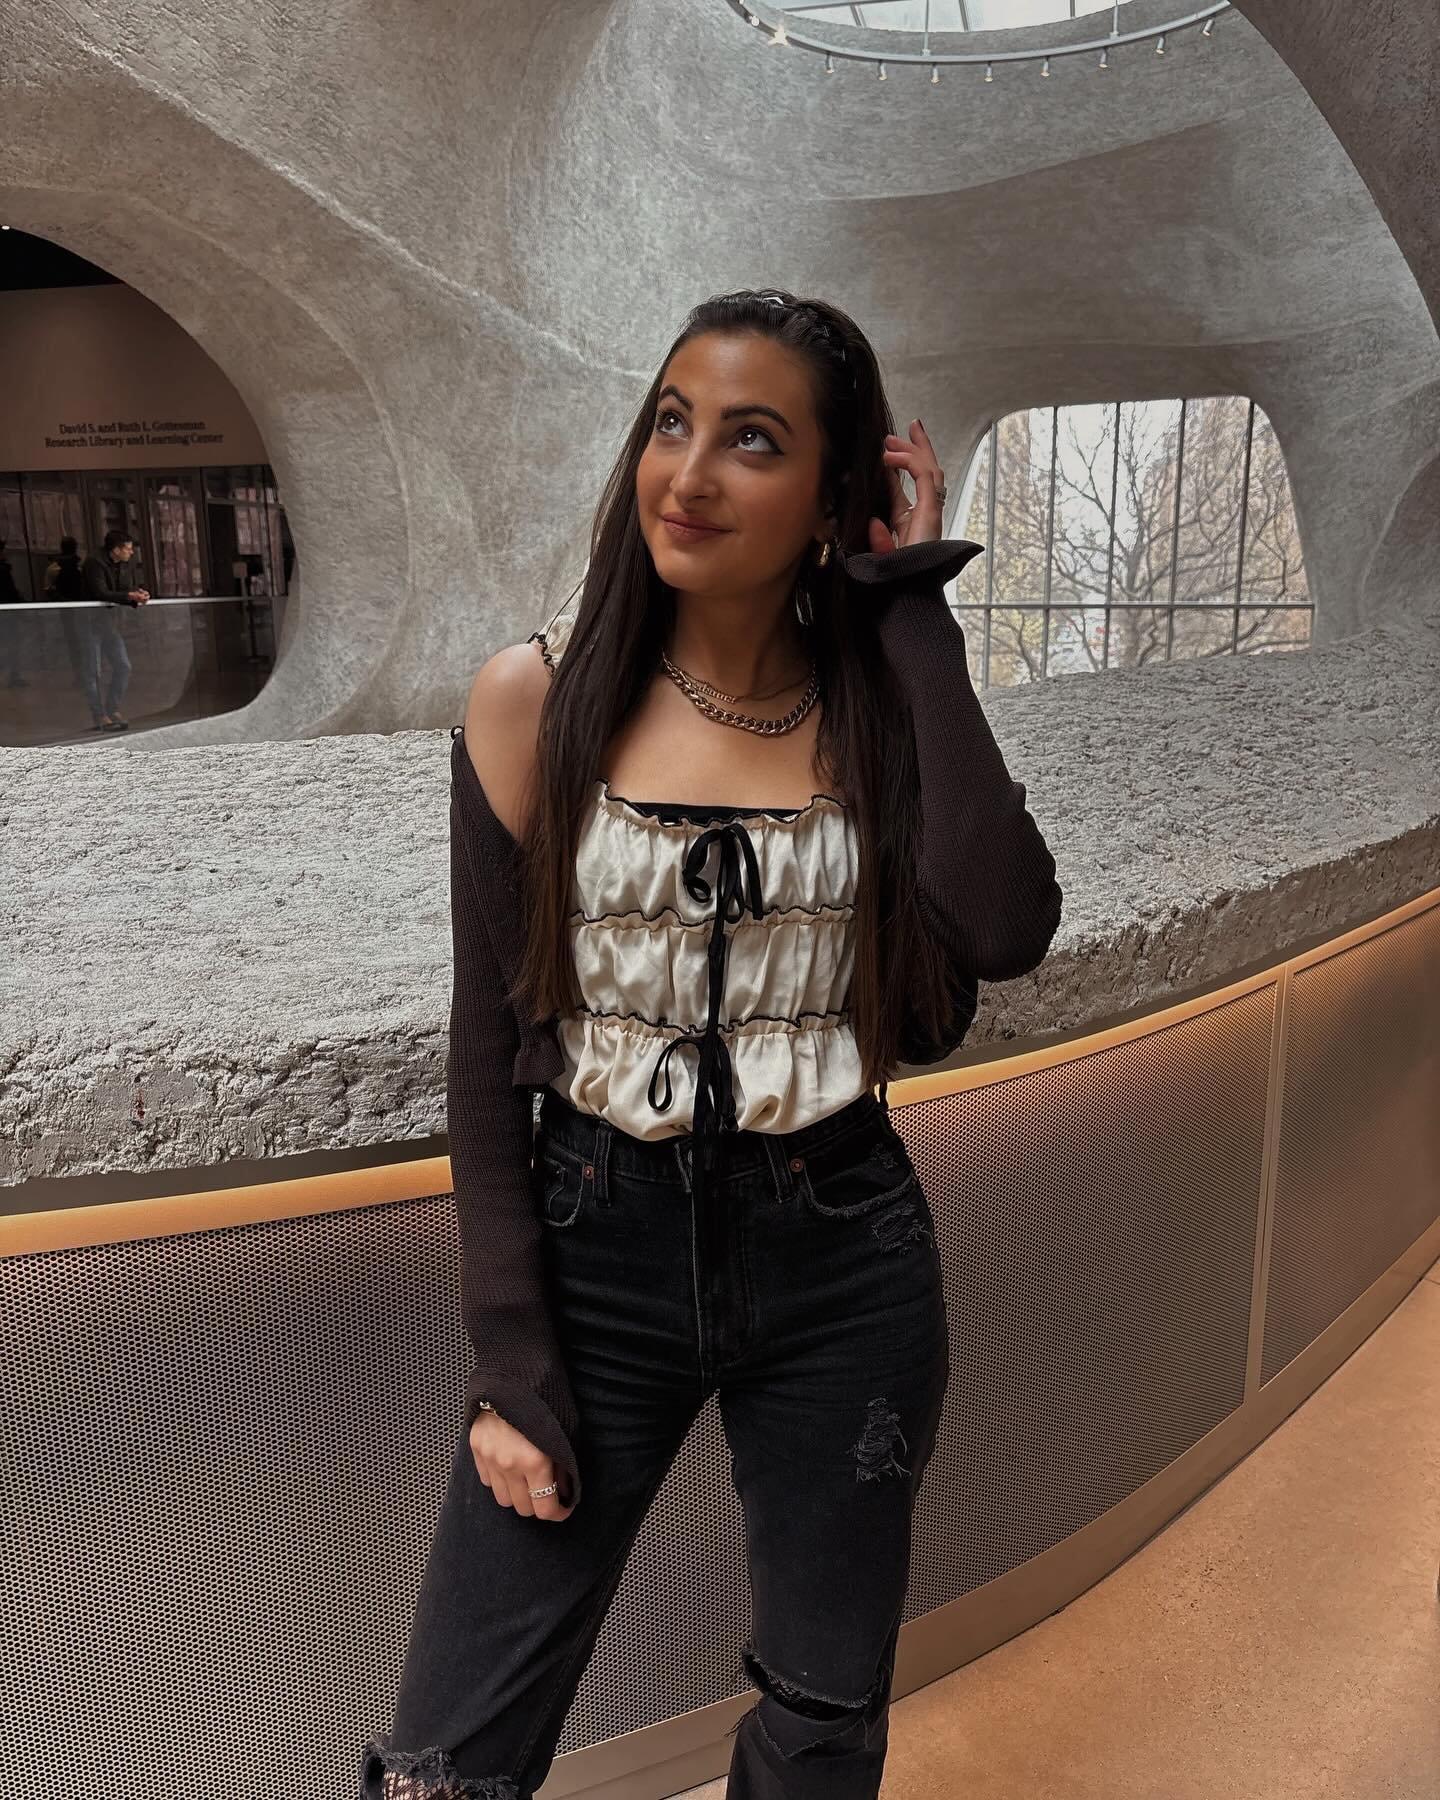 back in time for the afternoon @amnh ✖️🤎🪩🌼🏛️💫✨ #KILLERQUEEN 
&bull;
&bull;
&bull;
&bull;
&bull;
&bull;
&bull;
&bull;
&bull;
#nyclifestyle #nycstyle #springoutfitinspo #nycspring #anhm #nycblogger #nycbloggerstyle #bloggerstyle